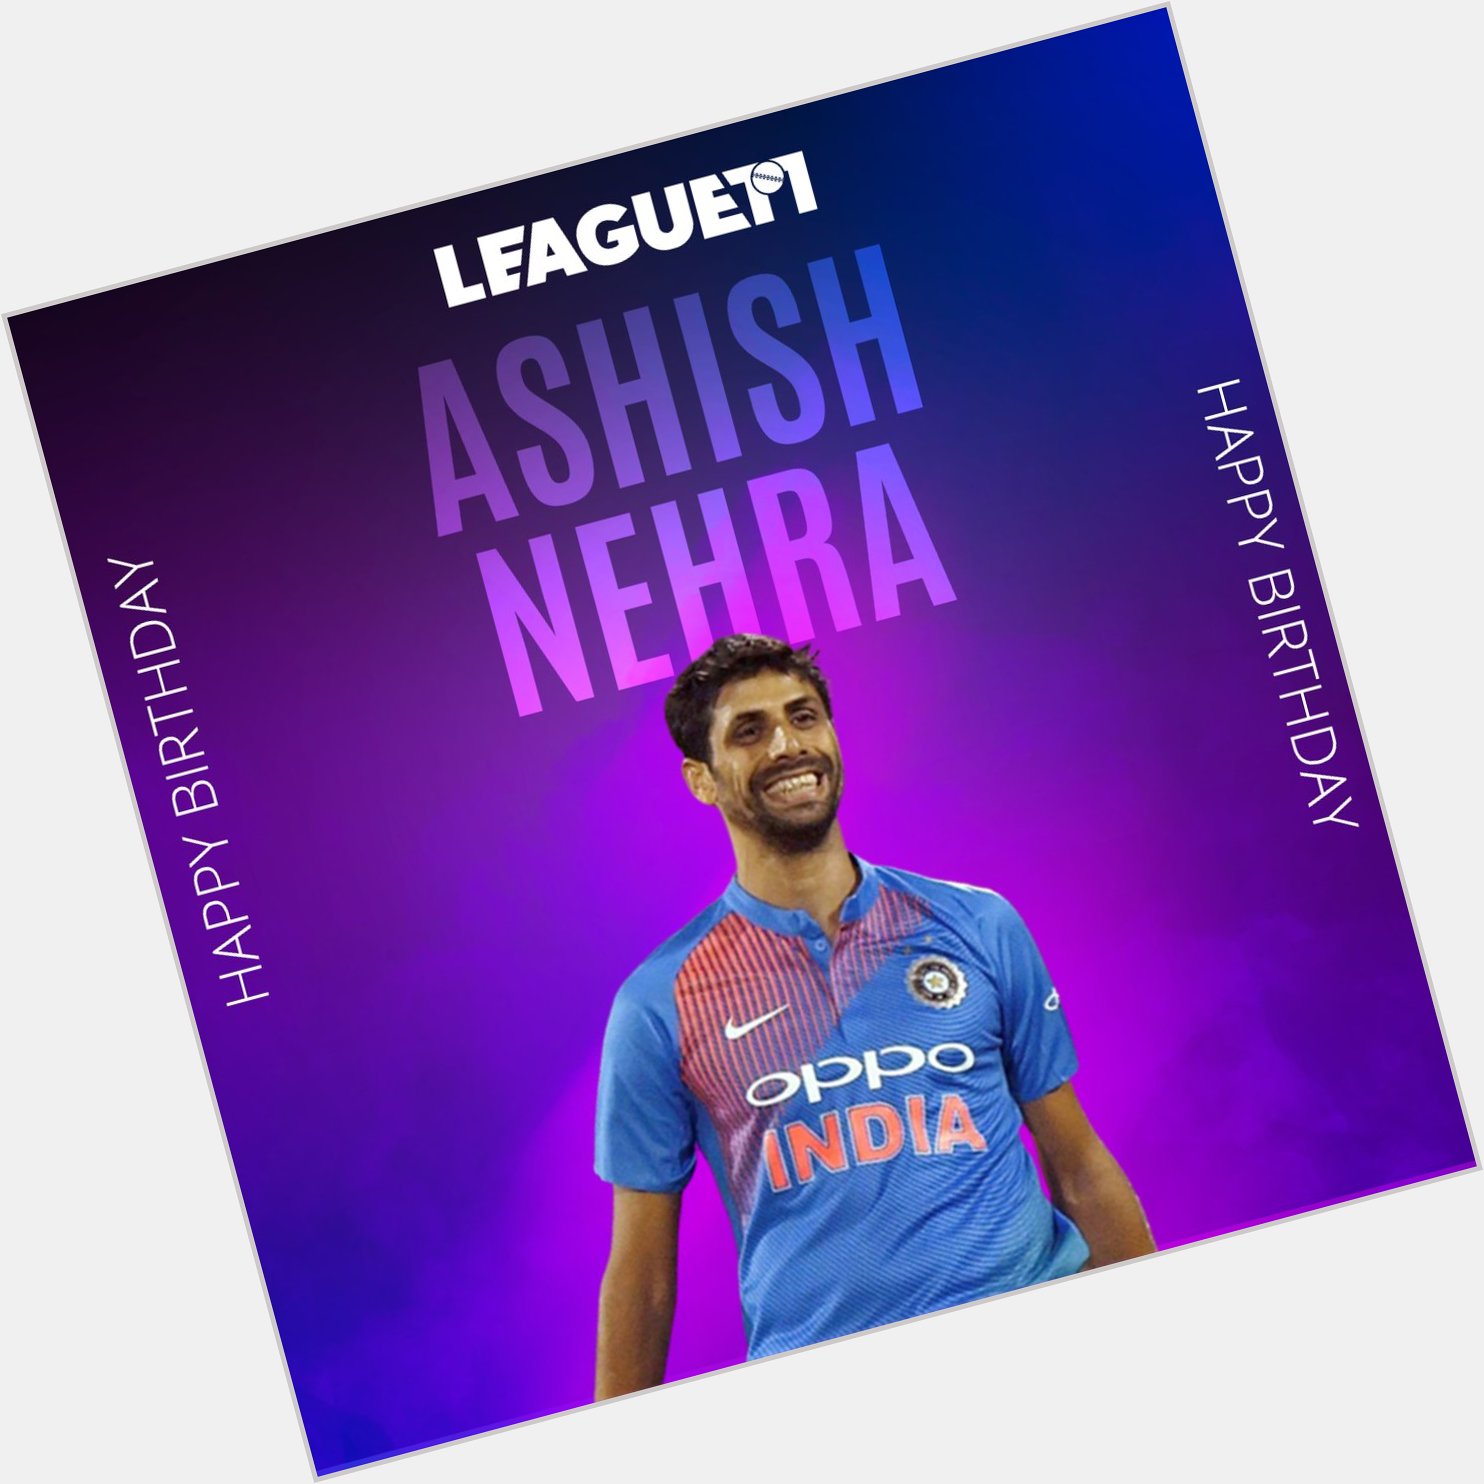 Happy birthday Ashish Nehra     252 Matches 341 Wickets in His Career     